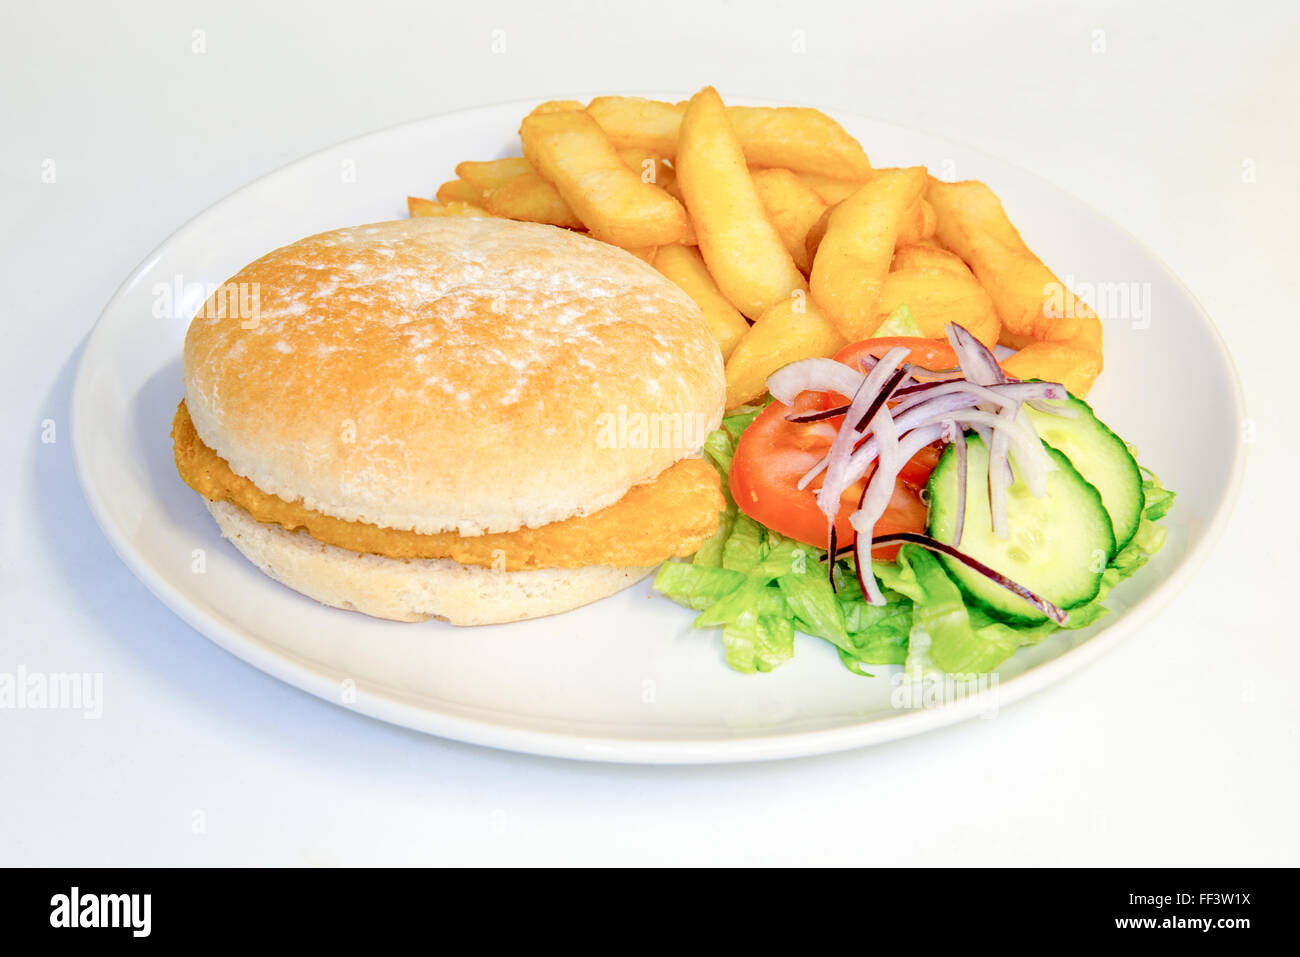 Breaded chicken burger in a bun meal with chips and salad Stock Photo